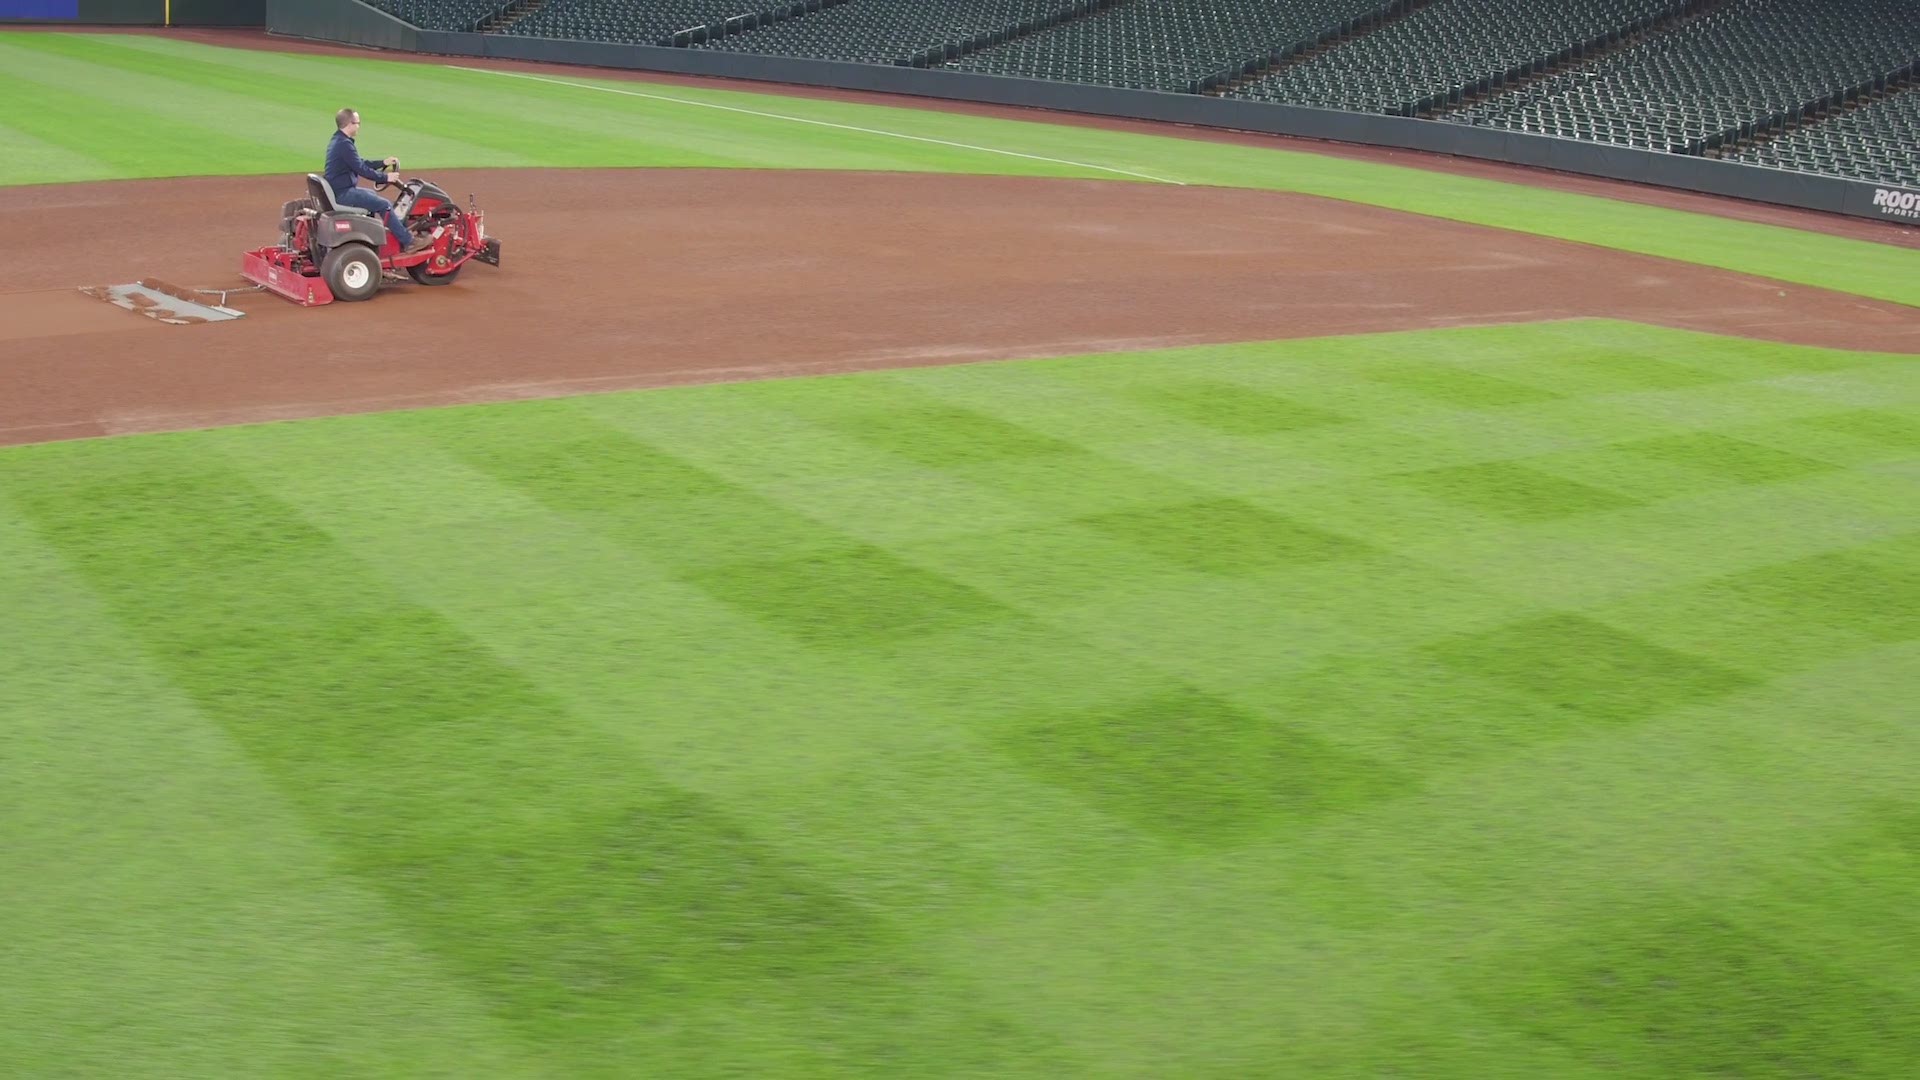 KING 5 flew our drone "Dexter" inside Safeco Field for new perspective of the Mariners' home turf.